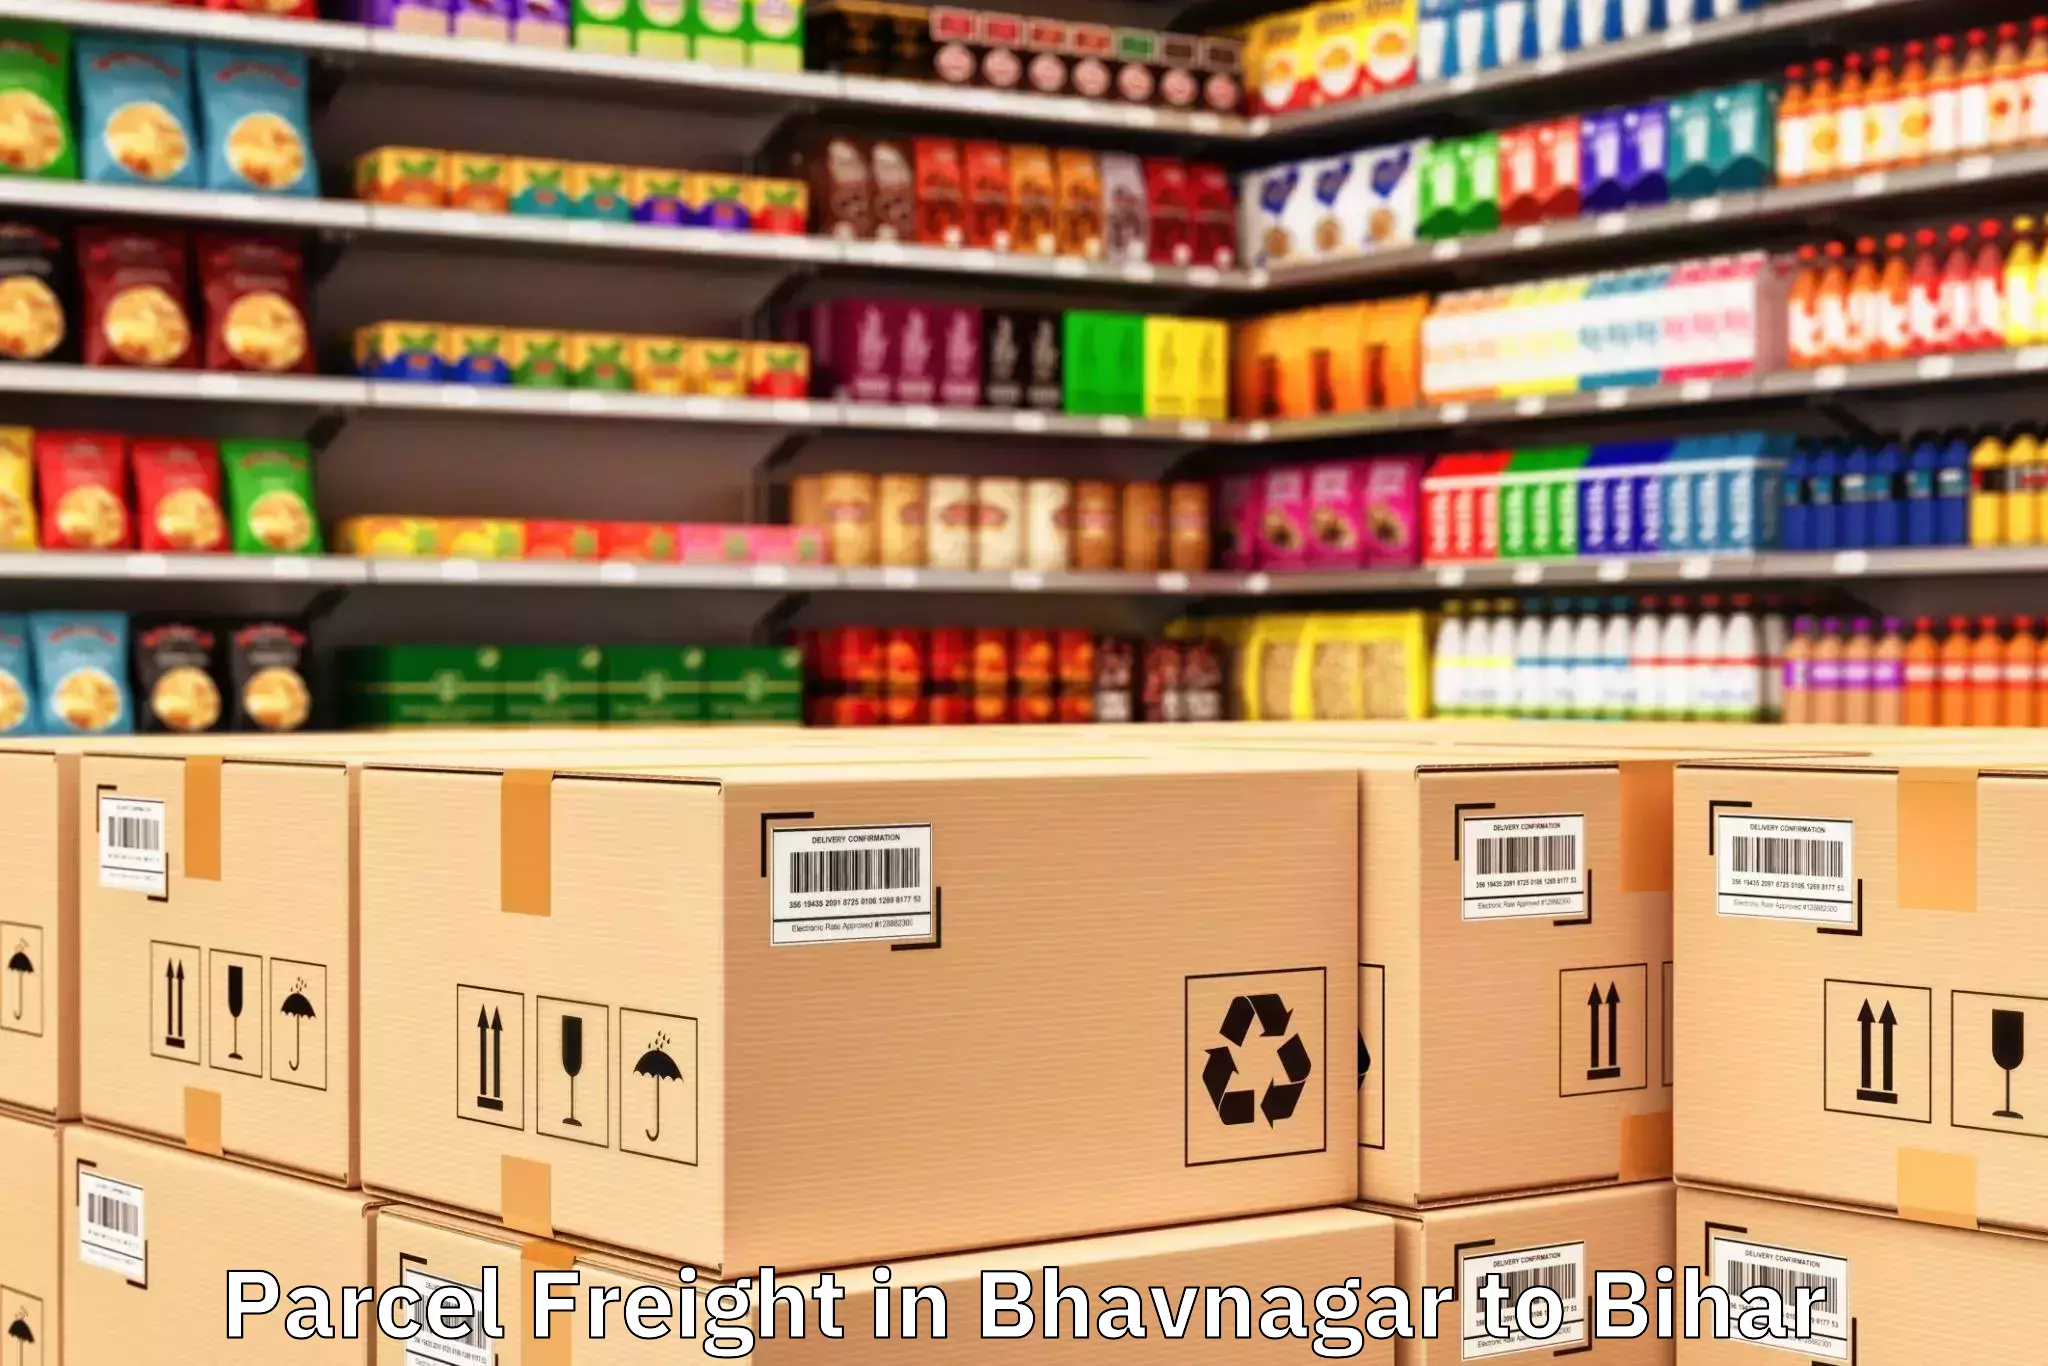 Top Bhavnagar to Barachatti Parcel Freight Available